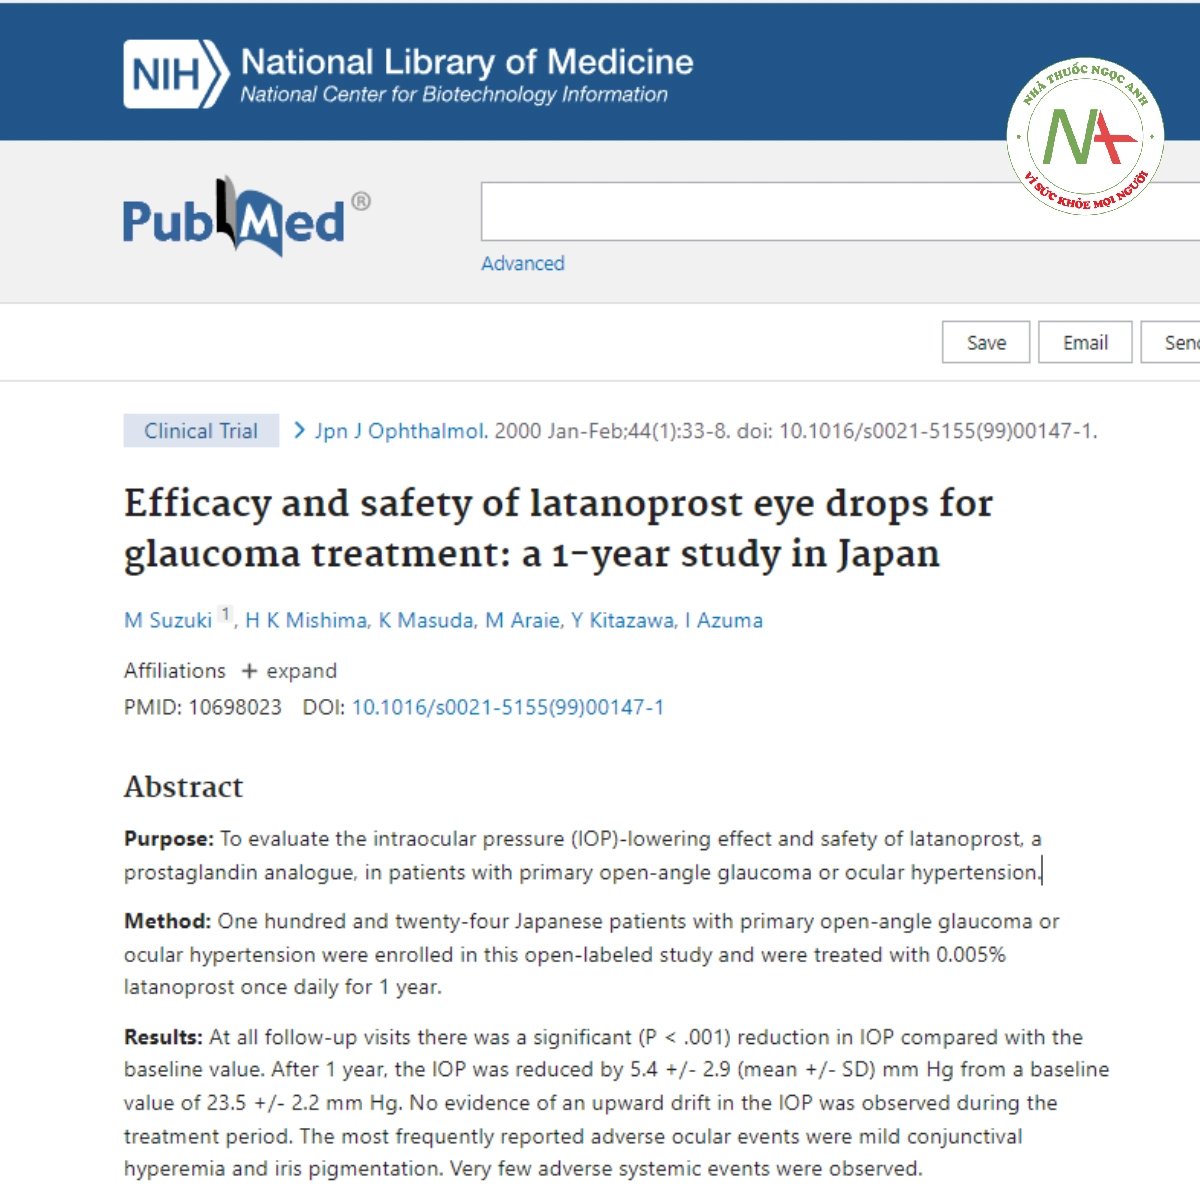 Efficacy and safety of latanoprost eye drops for glaucoma treatment: a 1-year study in Japan